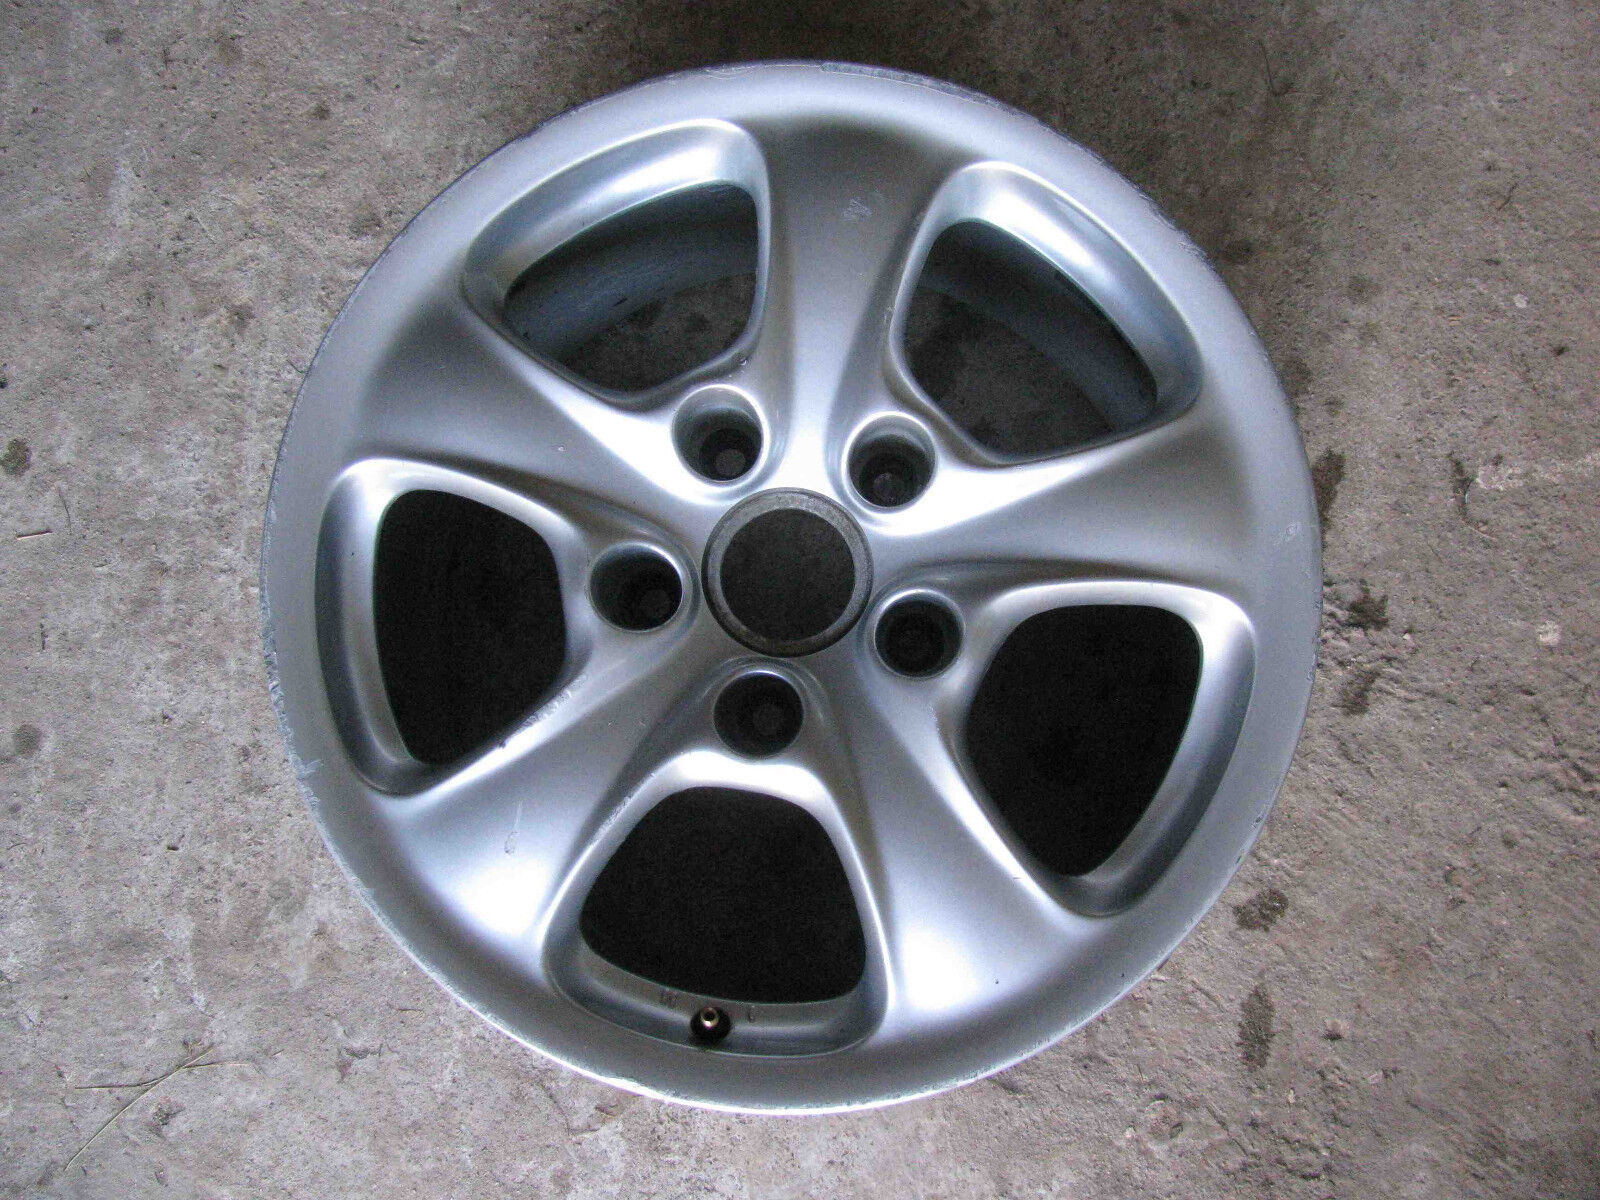 Porsche 911 C4 Wheel, 17"The original wheels were all tested and found to be true and aside from some minor scuffing, which is normal for an almost 23 year old wheel (my 911 is a 2000 model year), the wheel is solid and would make a great replacement and/or spare wheel